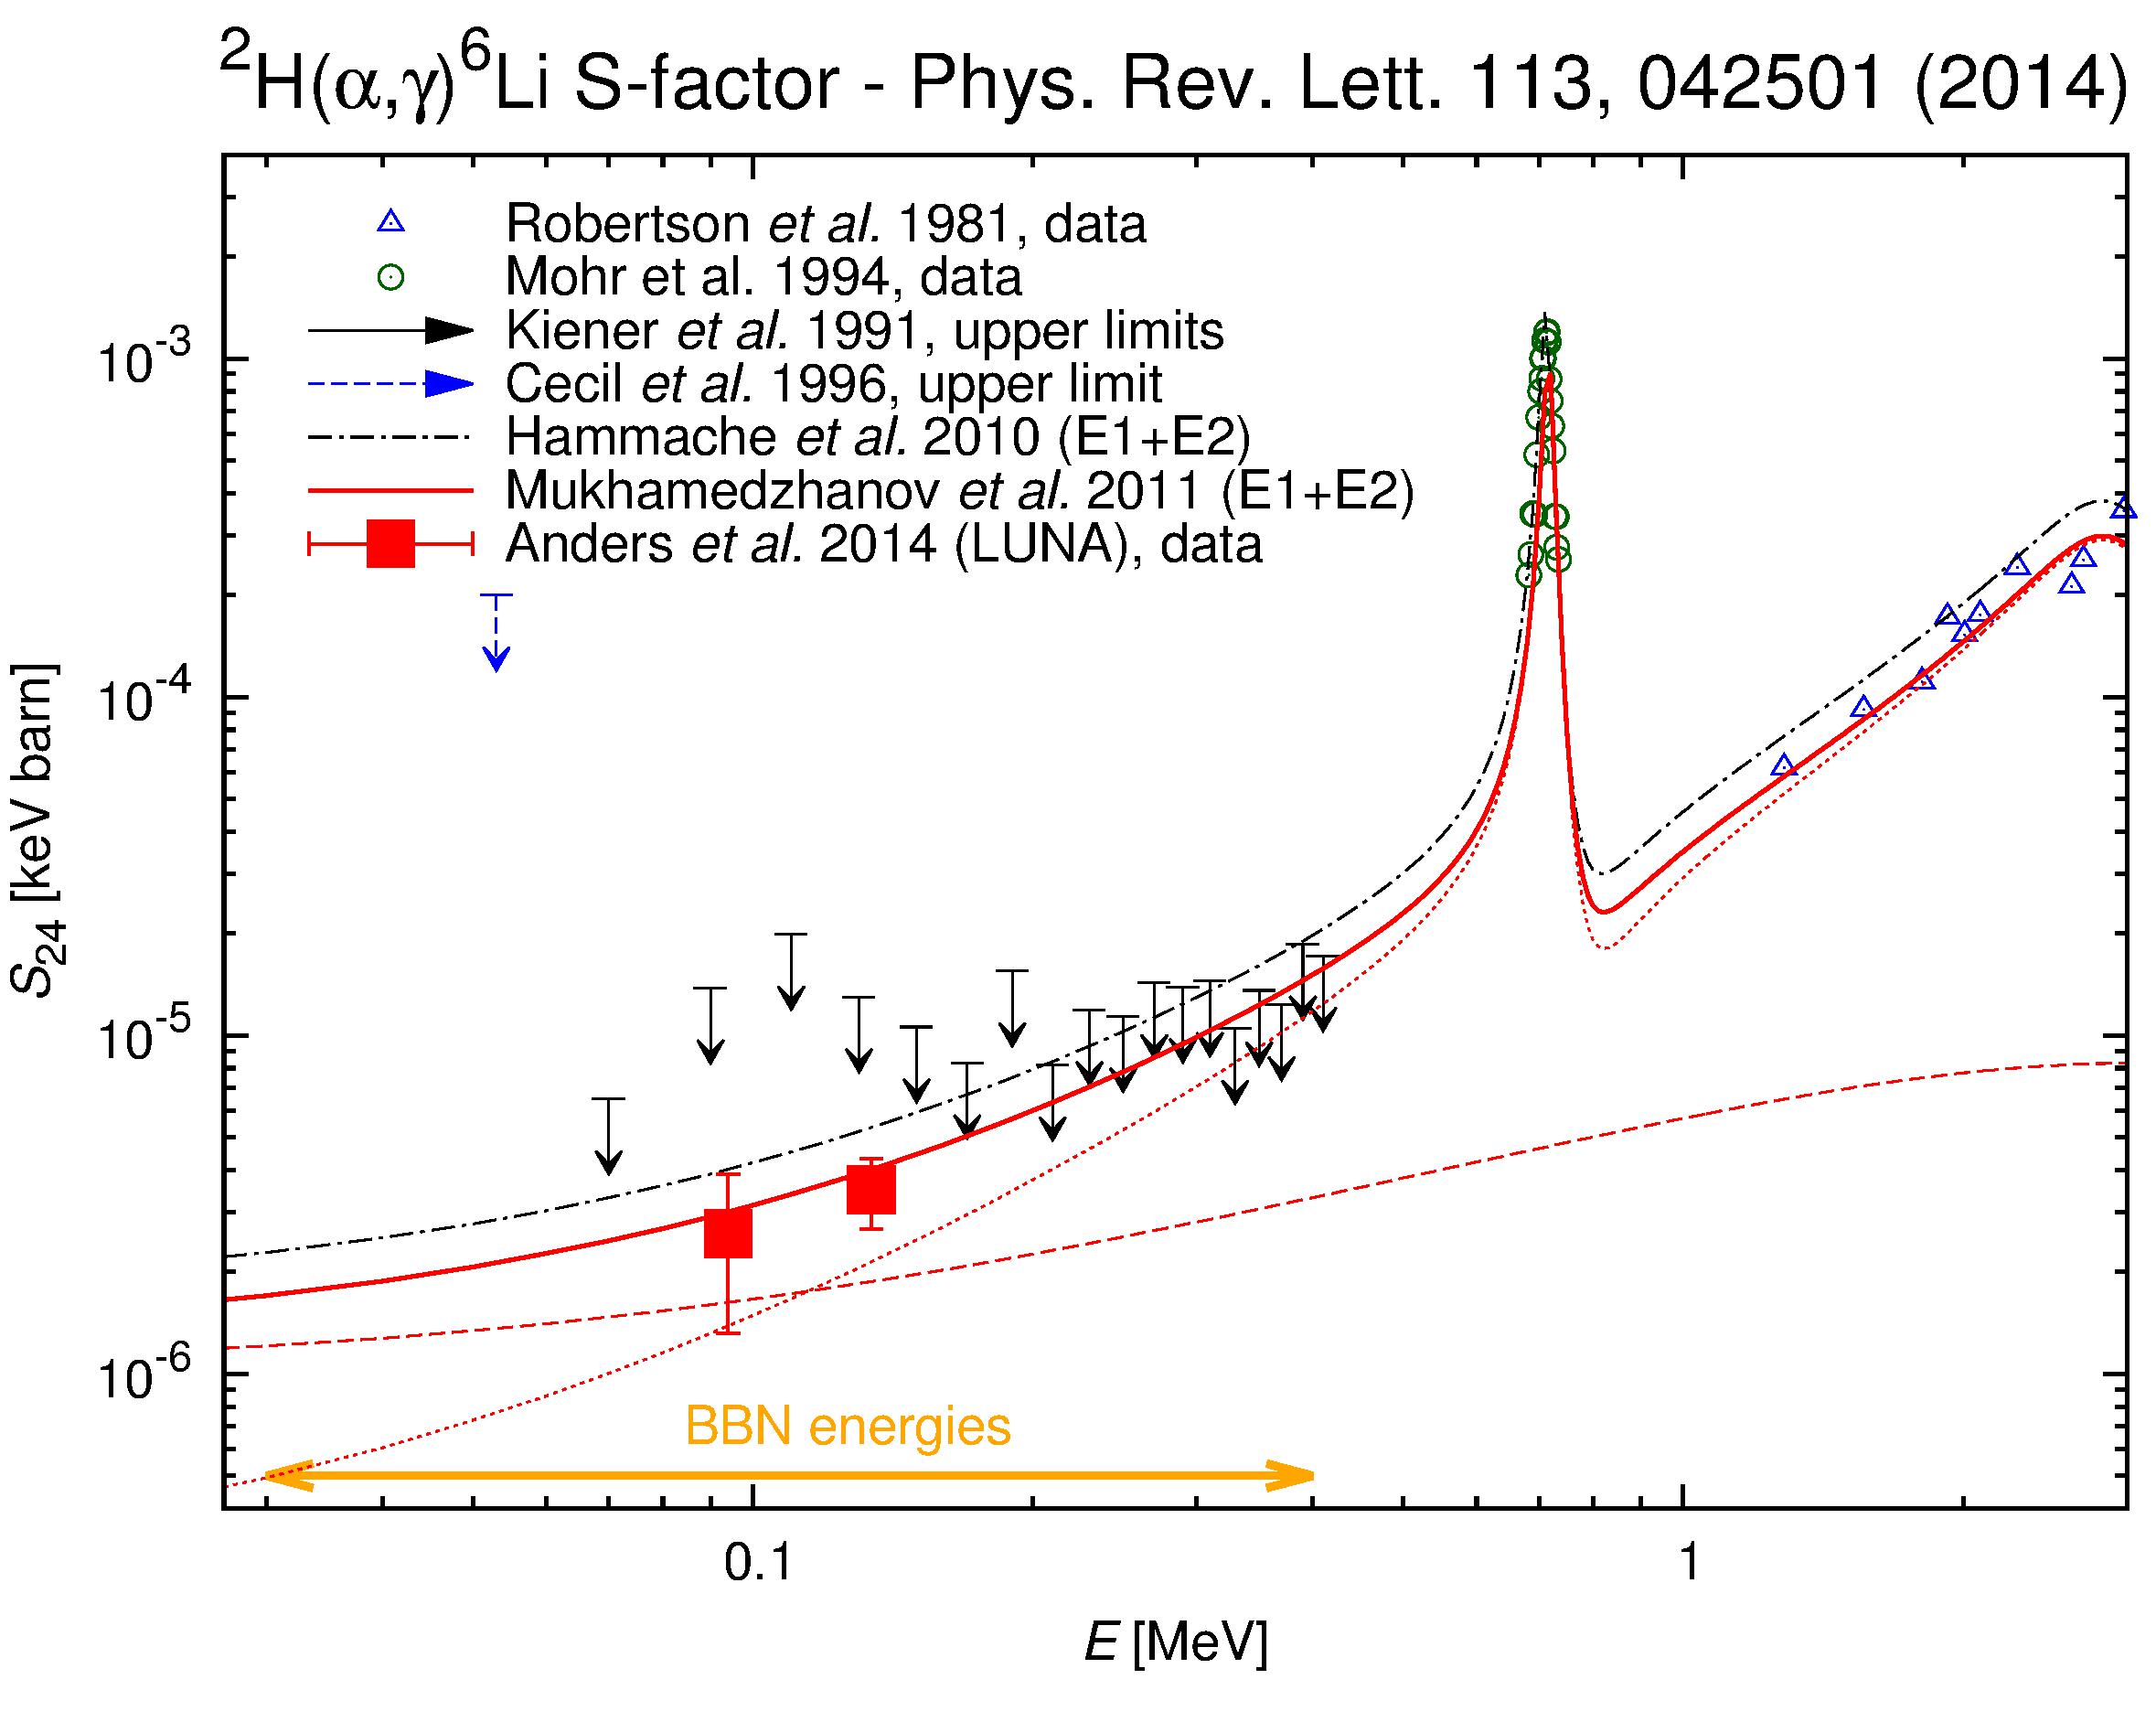 Astrophysical S-factor S24 of the 2H(alpha,gamma)6Li reaction from LUNA (Phys. Rev. Lett. 113, 042501 (2014)).